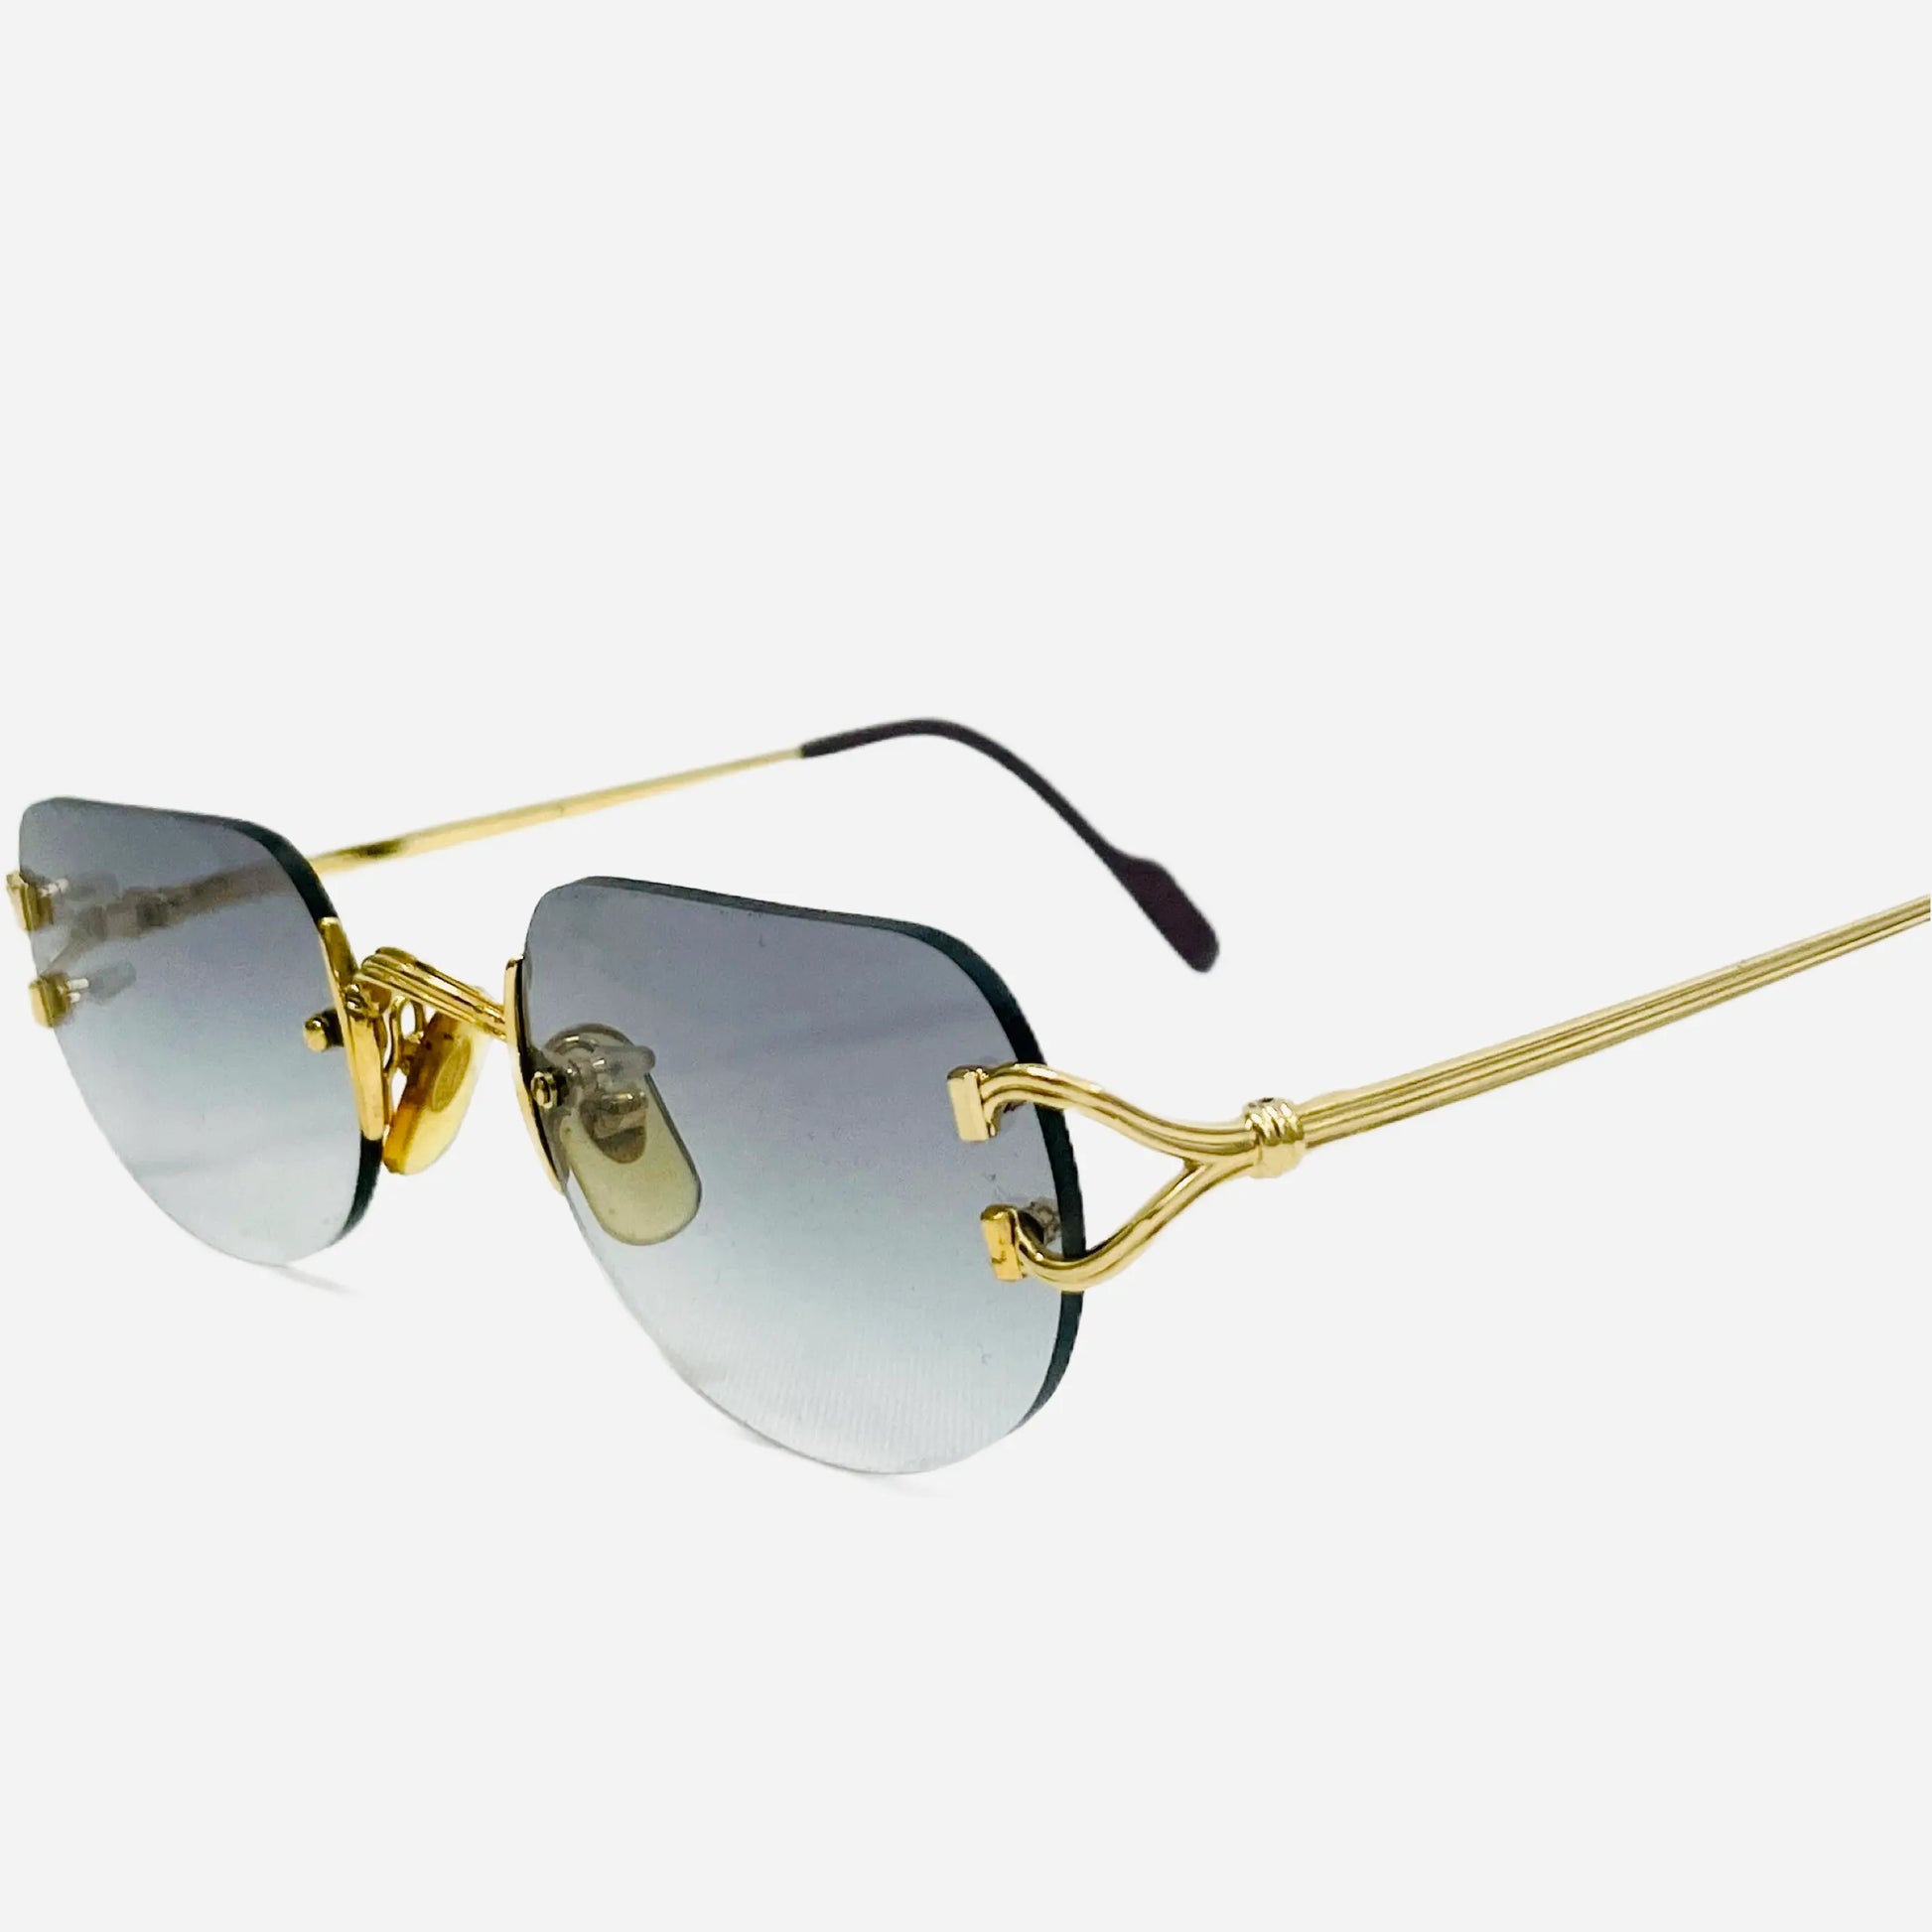 Vintage-Cartier-Big-C-Sonnenbrille-Sunglasses-22CT-Gold-Plated-the-seekers